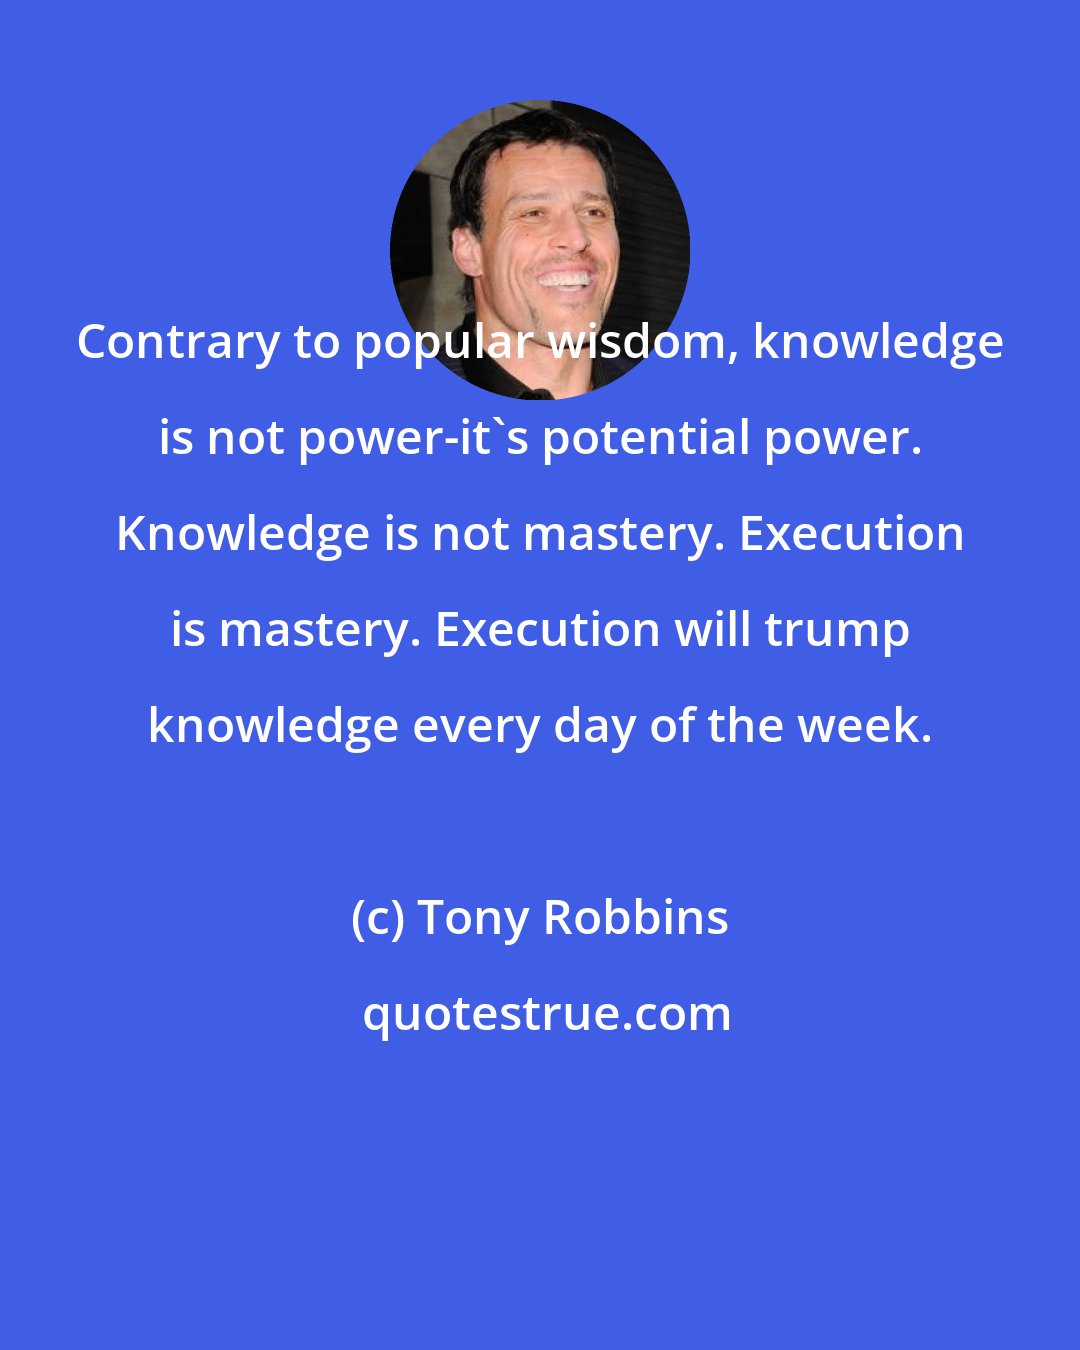 Tony Robbins: Contrary to popular wisdom, knowledge is not power-it's potential power. Knowledge is not mastery. Execution is mastery. Execution will trump knowledge every day of the week.